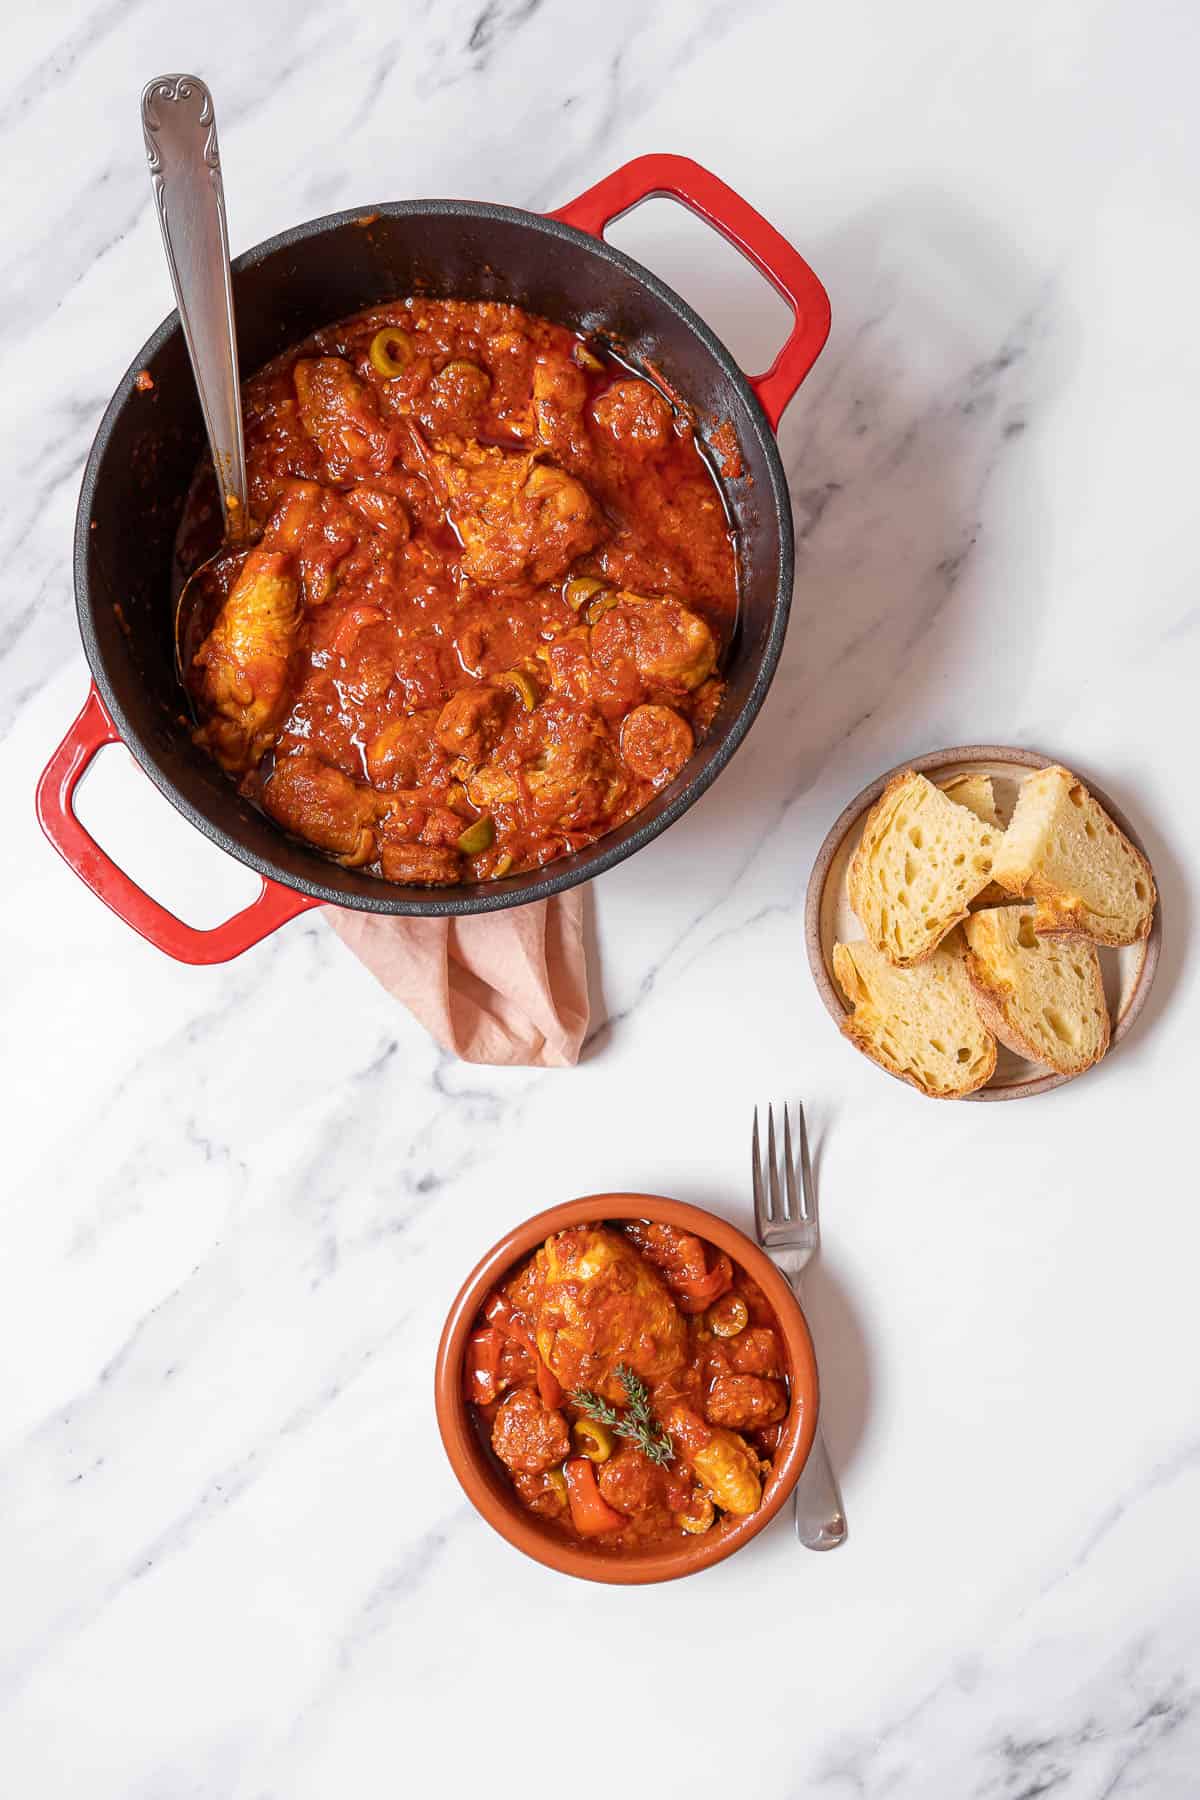 a pot of chicken and chorizo stew with a small bowl and plate of bread.